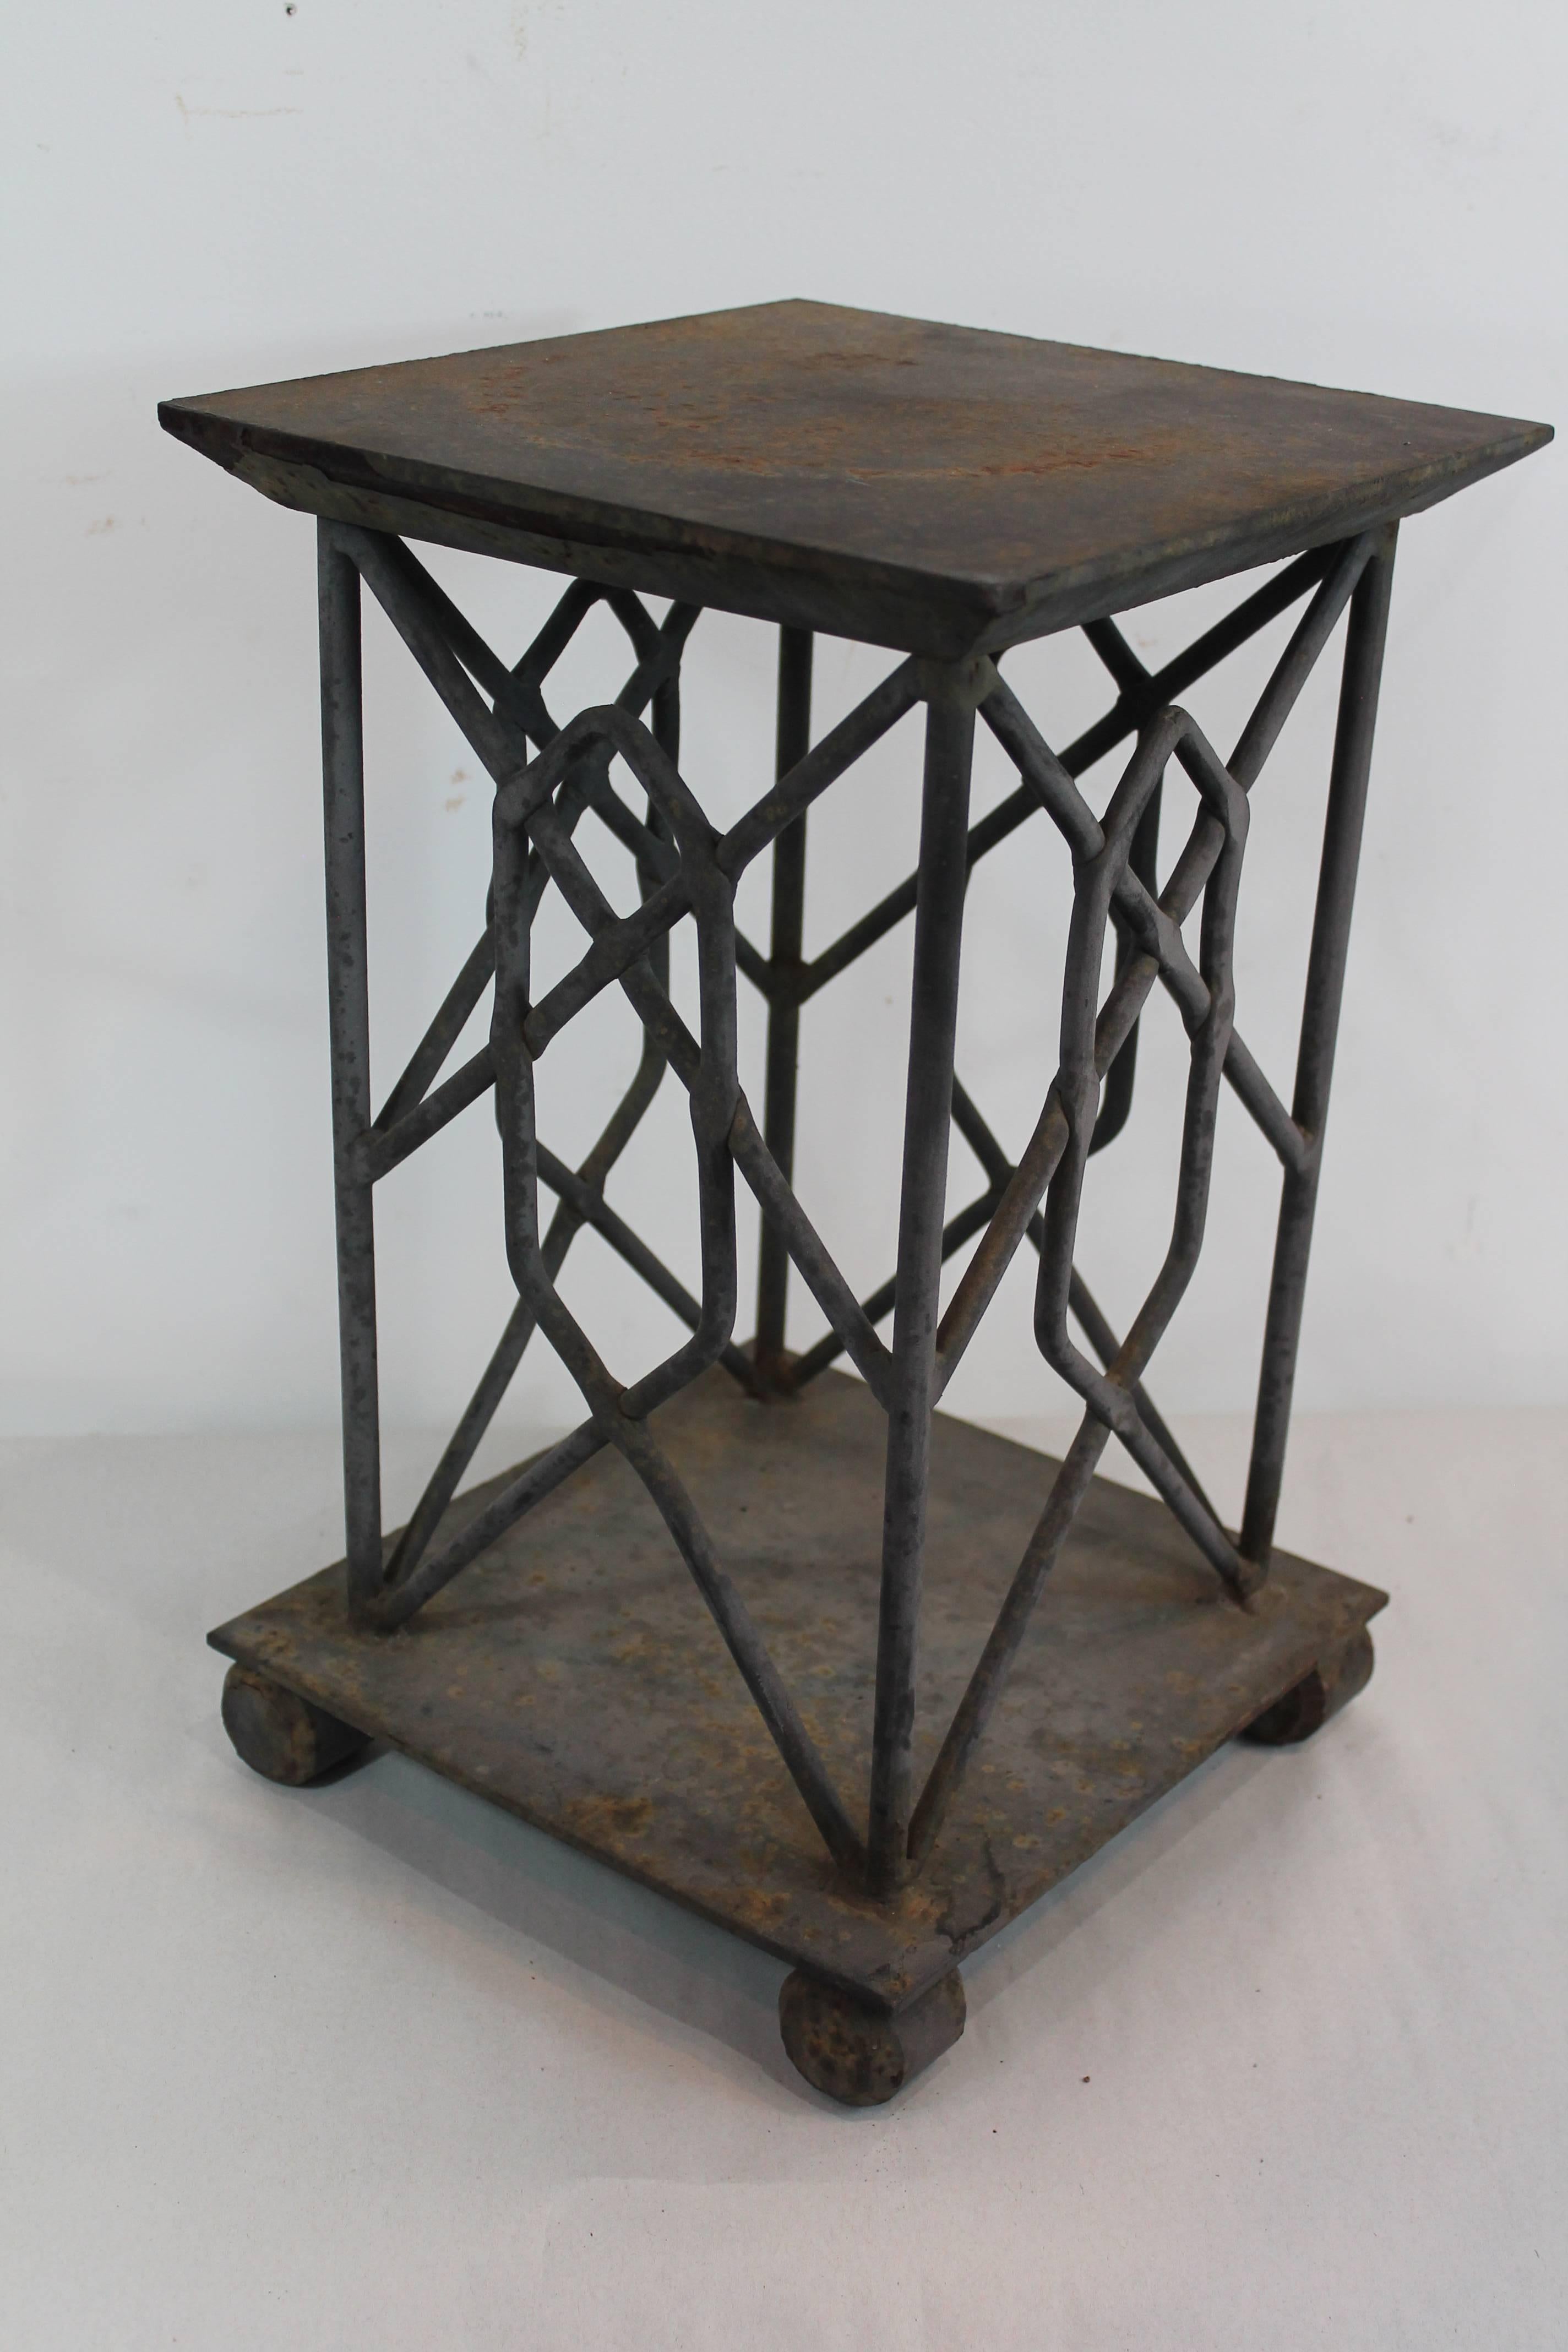 Great graphic hand-wrought iron sculptural side table.
Wonderful simple elegant attention to detail with beveled edge on top and toosie roll feet.
Wonderful pale blue oxidized surface, it was likely used in a garden.